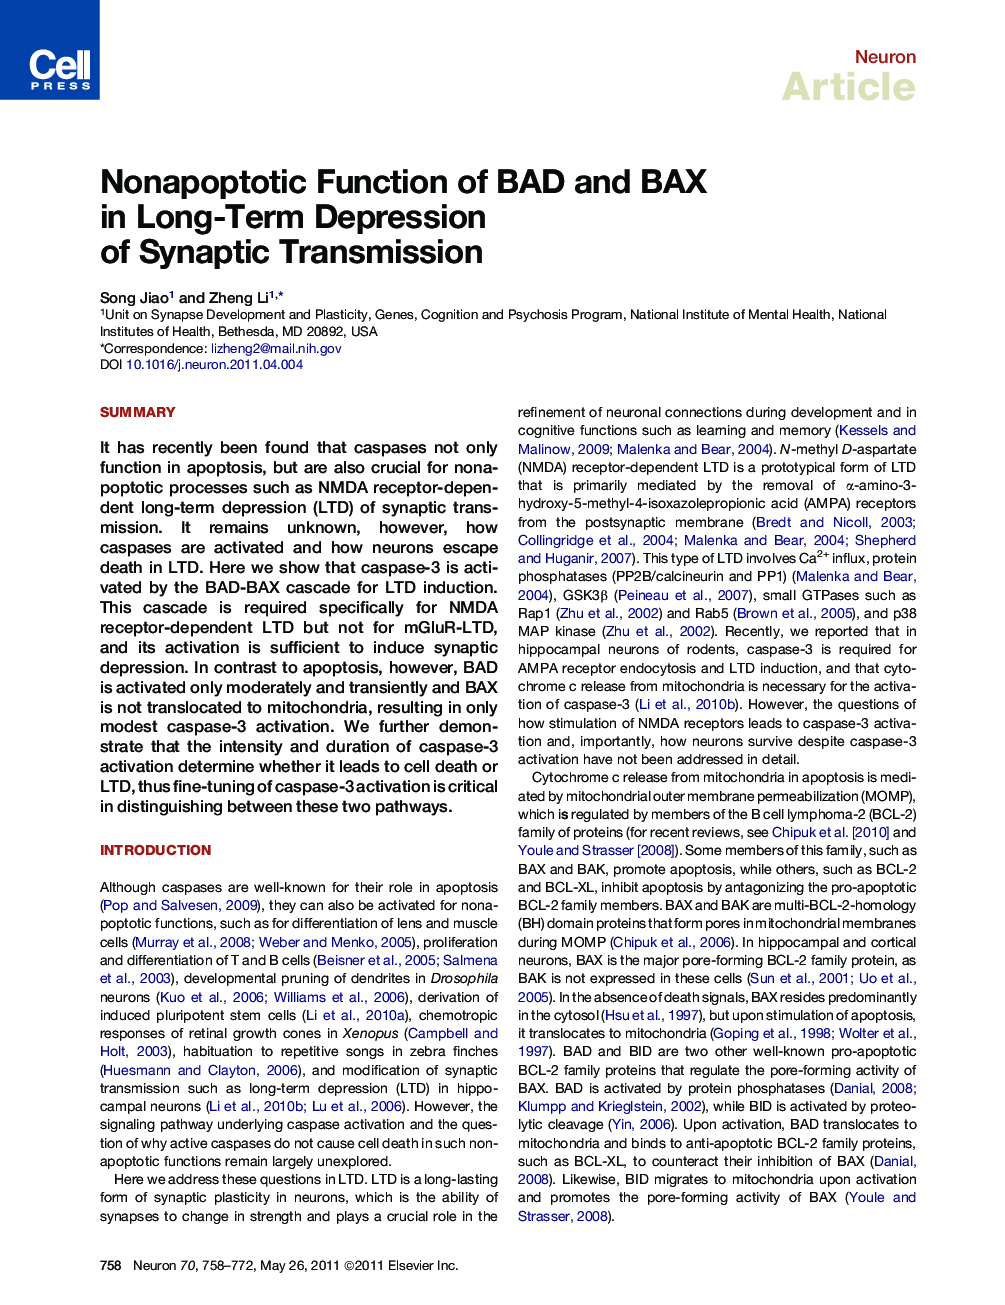 Nonapoptotic Function of BAD and BAX in Long-Term Depression of Synaptic Transmission